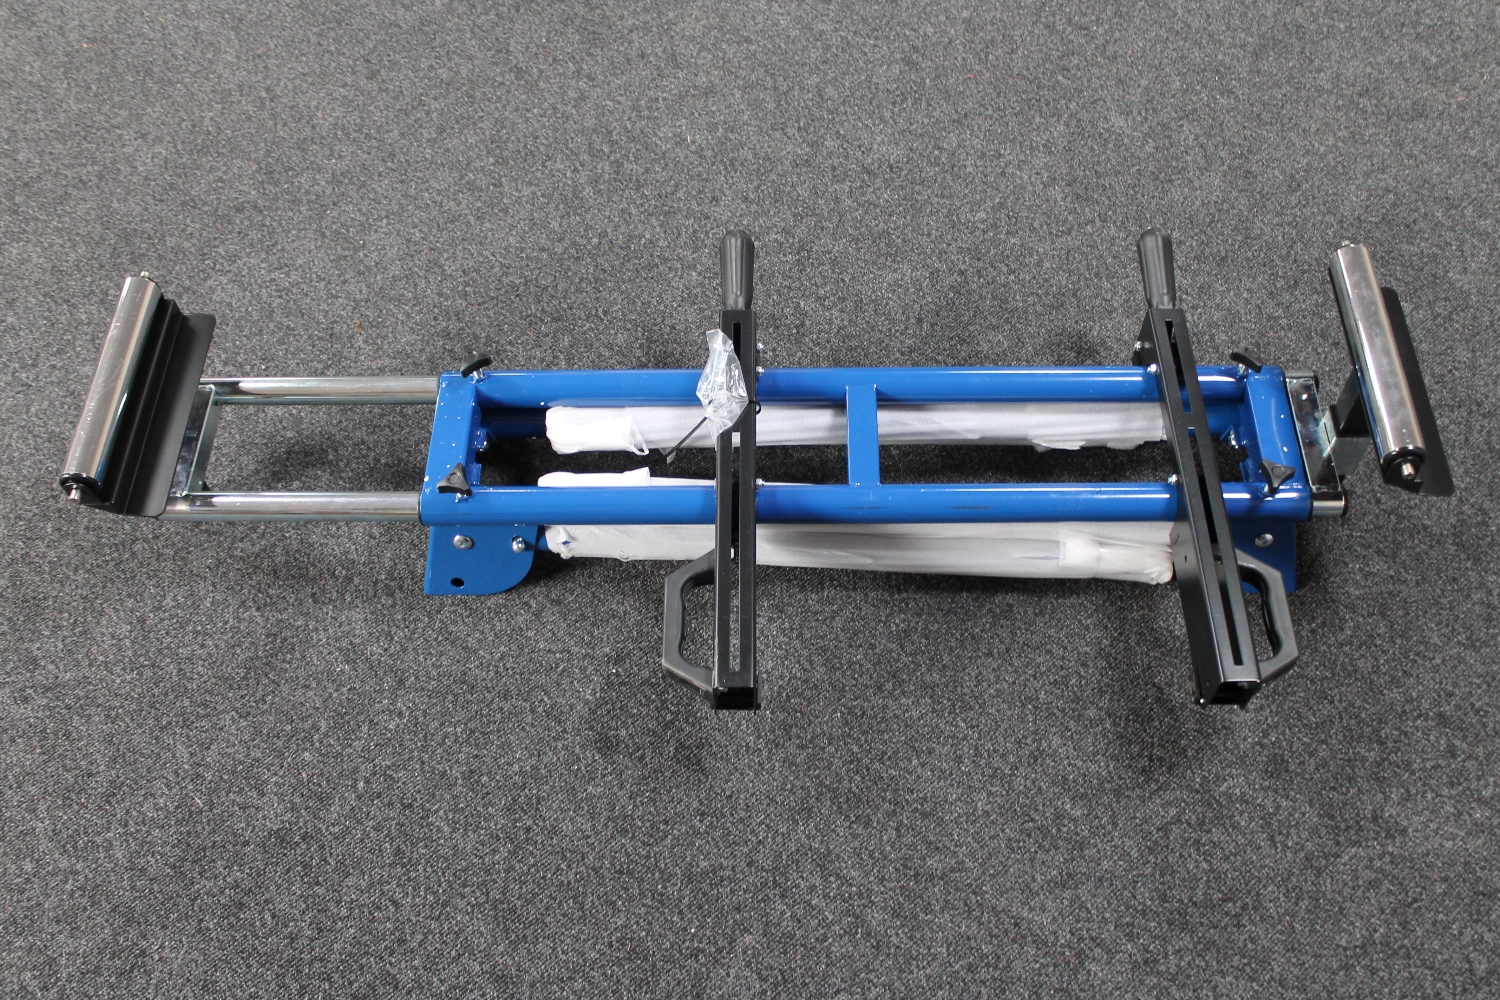 A folding metal roller stand